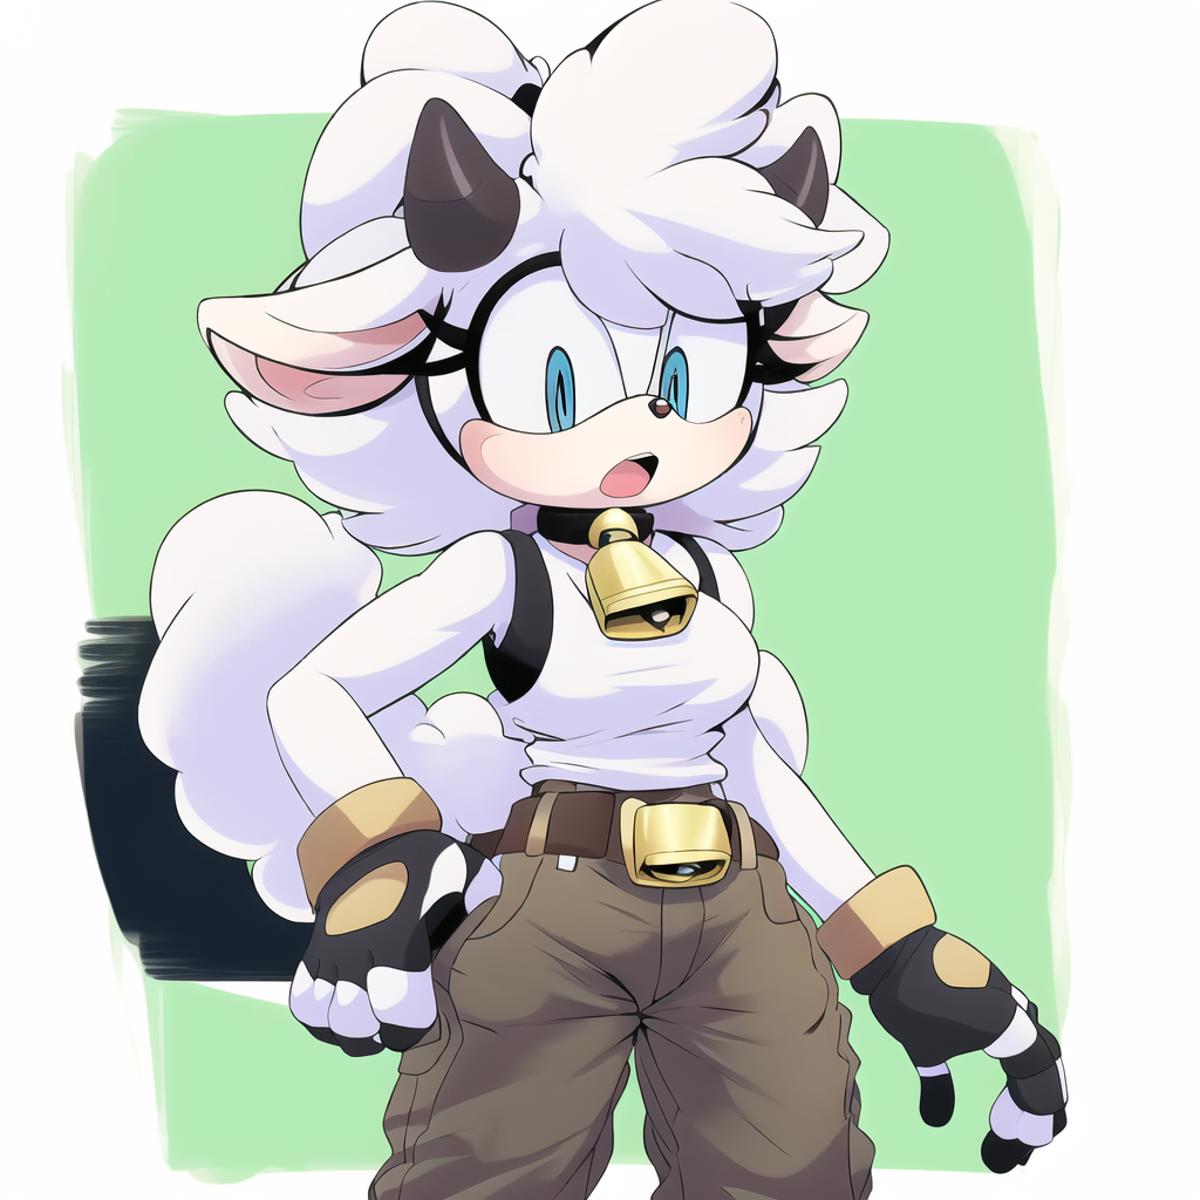 Lanolin the Sheep  image by Aigenerater